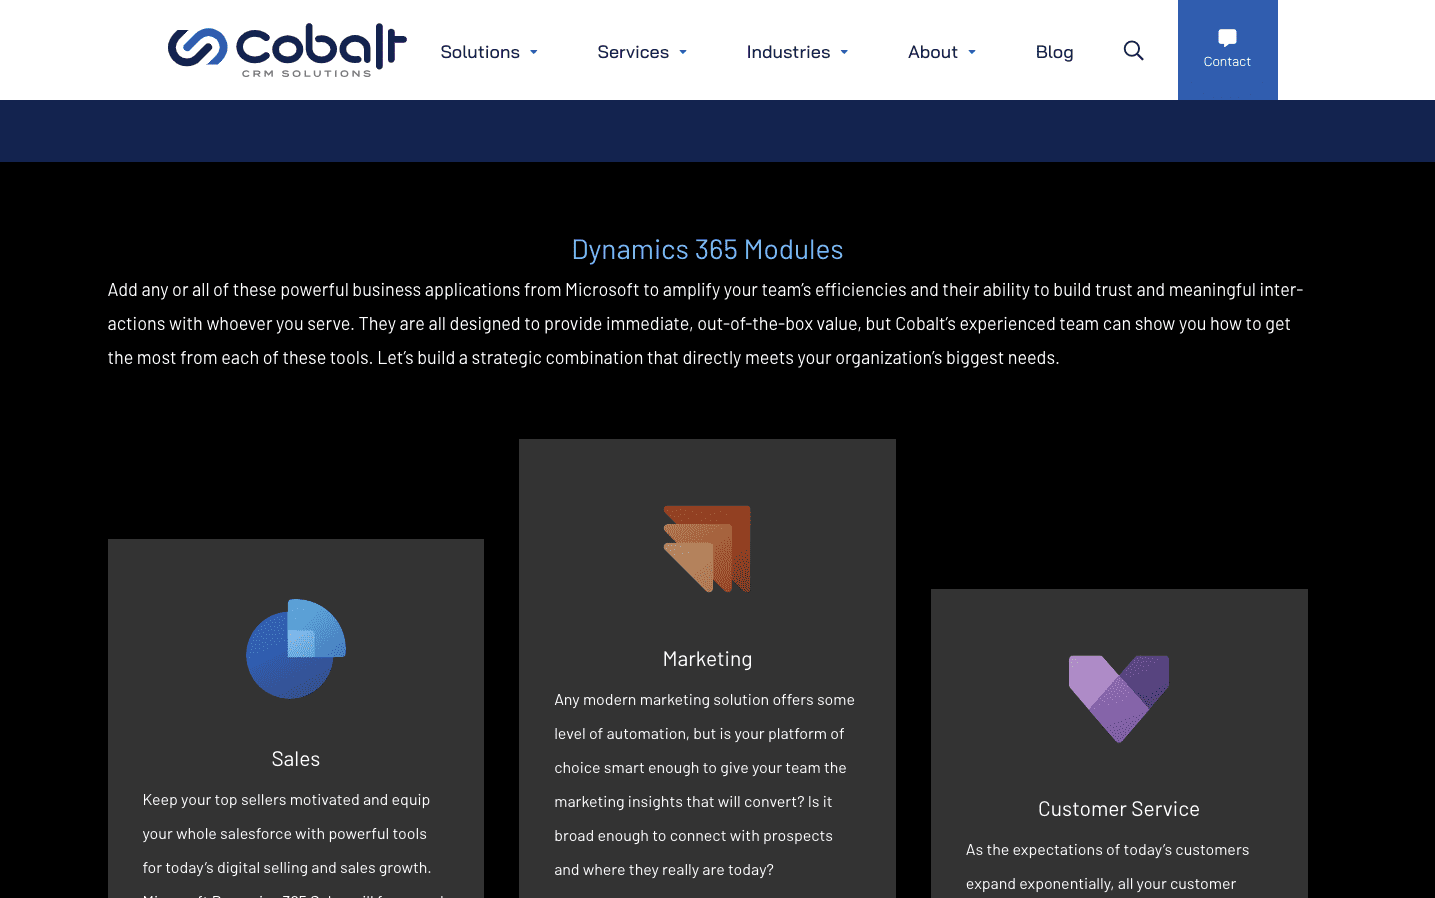 A screenshot from Cobalt’s website with information about the CRM they sell. The image includes icons and short descriptions of different applications included in the software. 